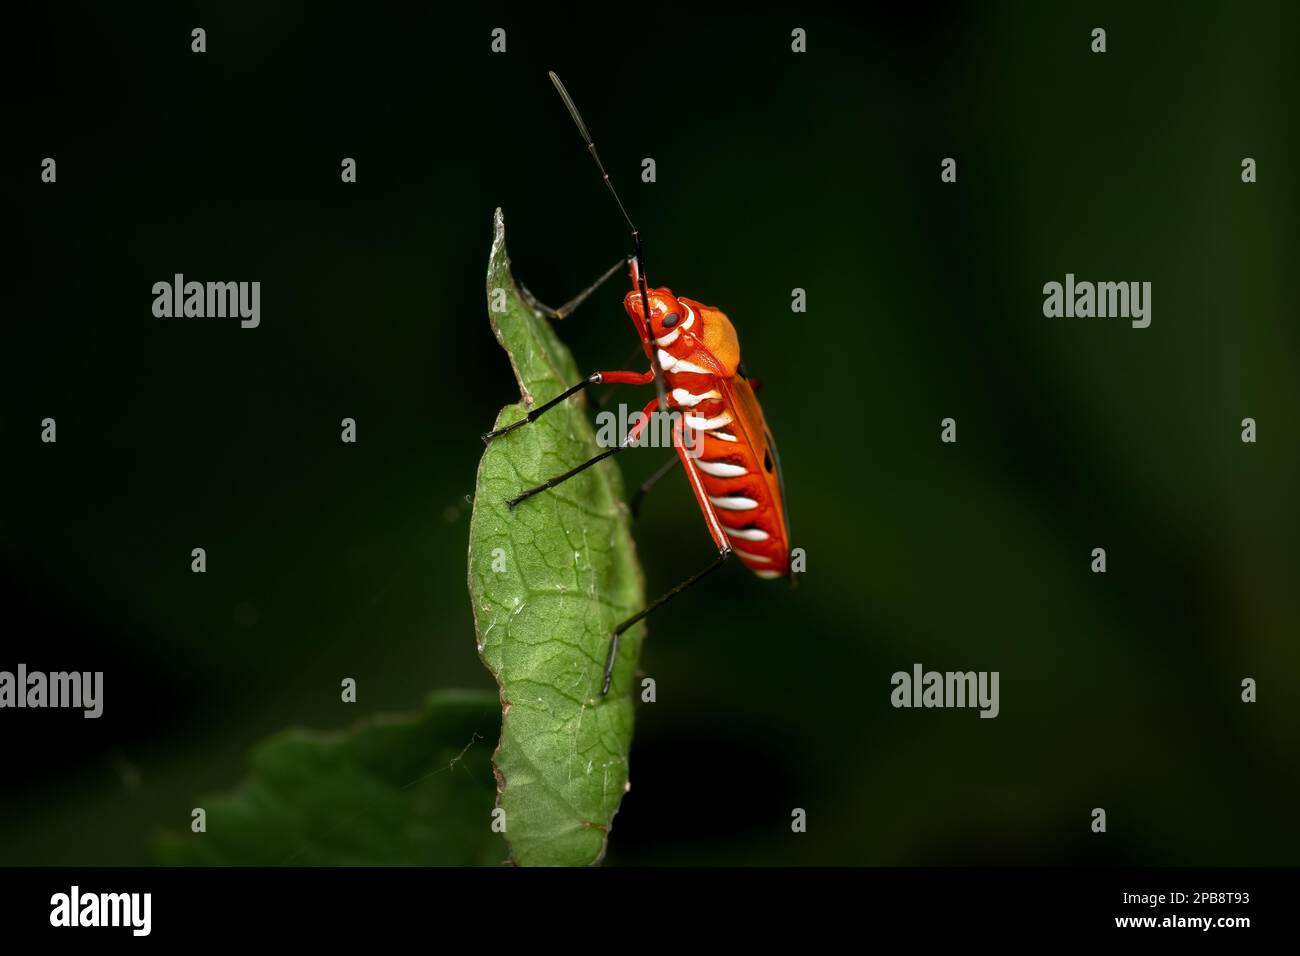 Red cotton bug or cotton stainer bug which is serious agriculture pest of Cotton crop. It damages cotton fibers and reduces crop yield. Stock Photo